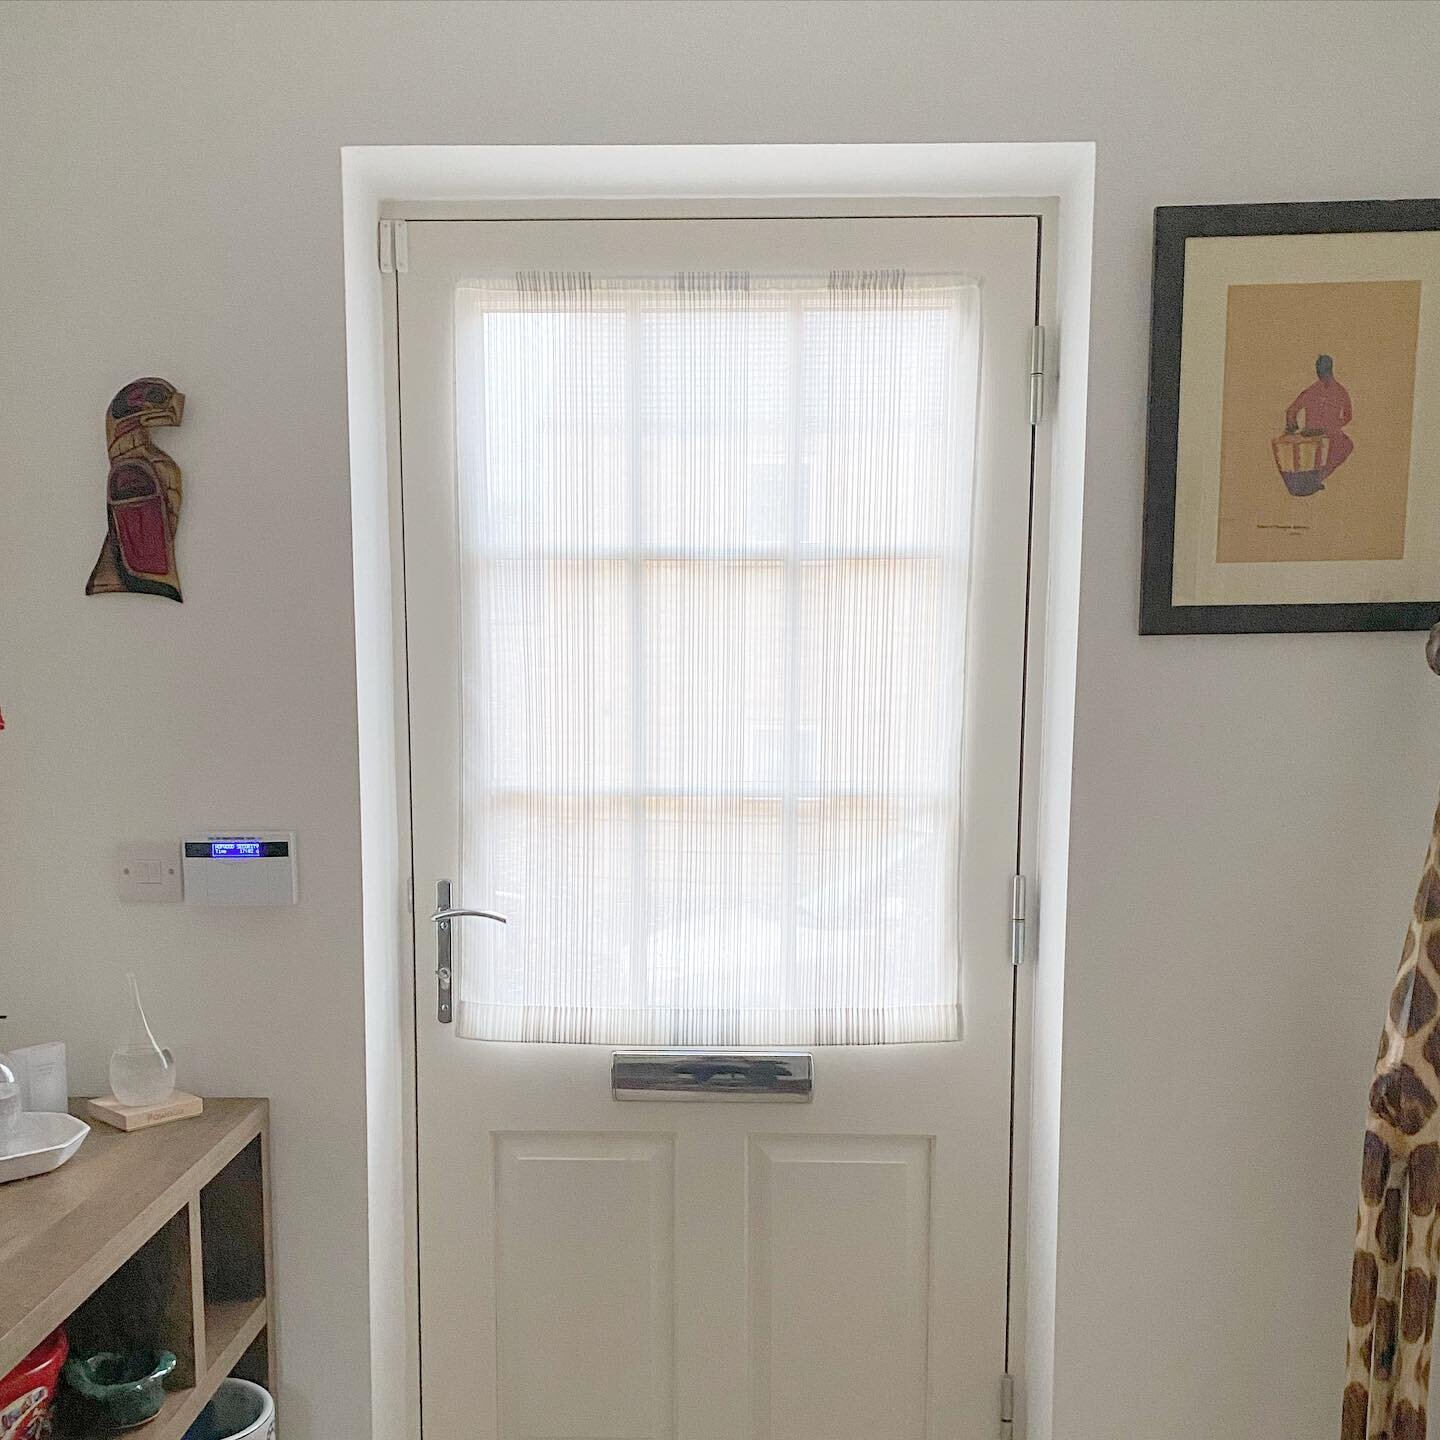 Having a flat voil curtain can give you a more modern look than a traditional gathered one. It will Still let the light in but gives you the privacy. #voil #curtain #madetomeasurevoiles #madetomeasurecurtain #curtainmaker #skipton #madeinskipton #hom